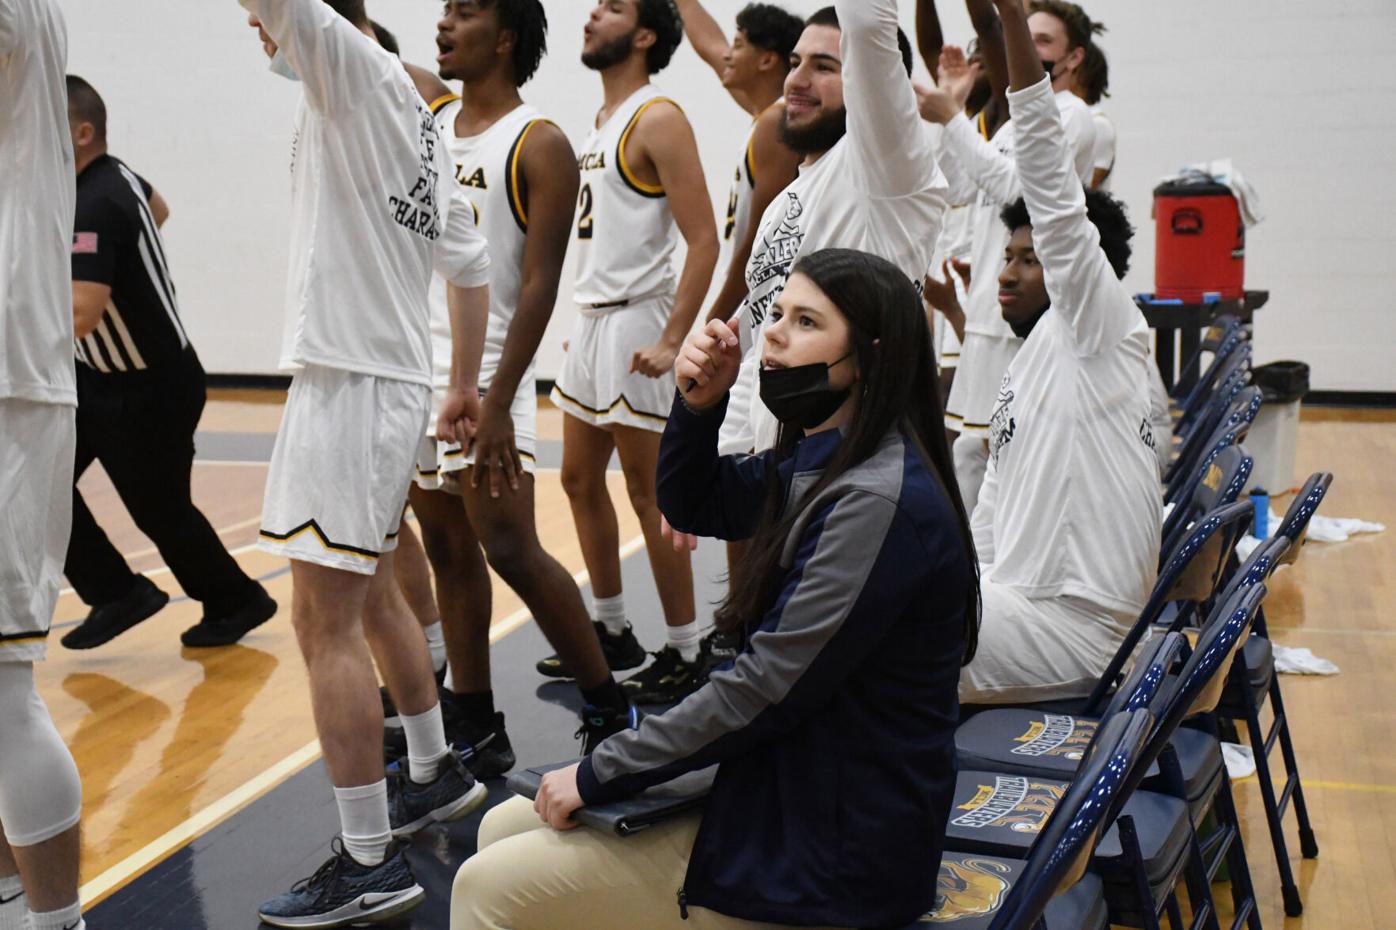 Assistant coach Courtney McLaughlin moves from women's basketball to the  men's program at MCLA | Sports | berkshireeagle.com